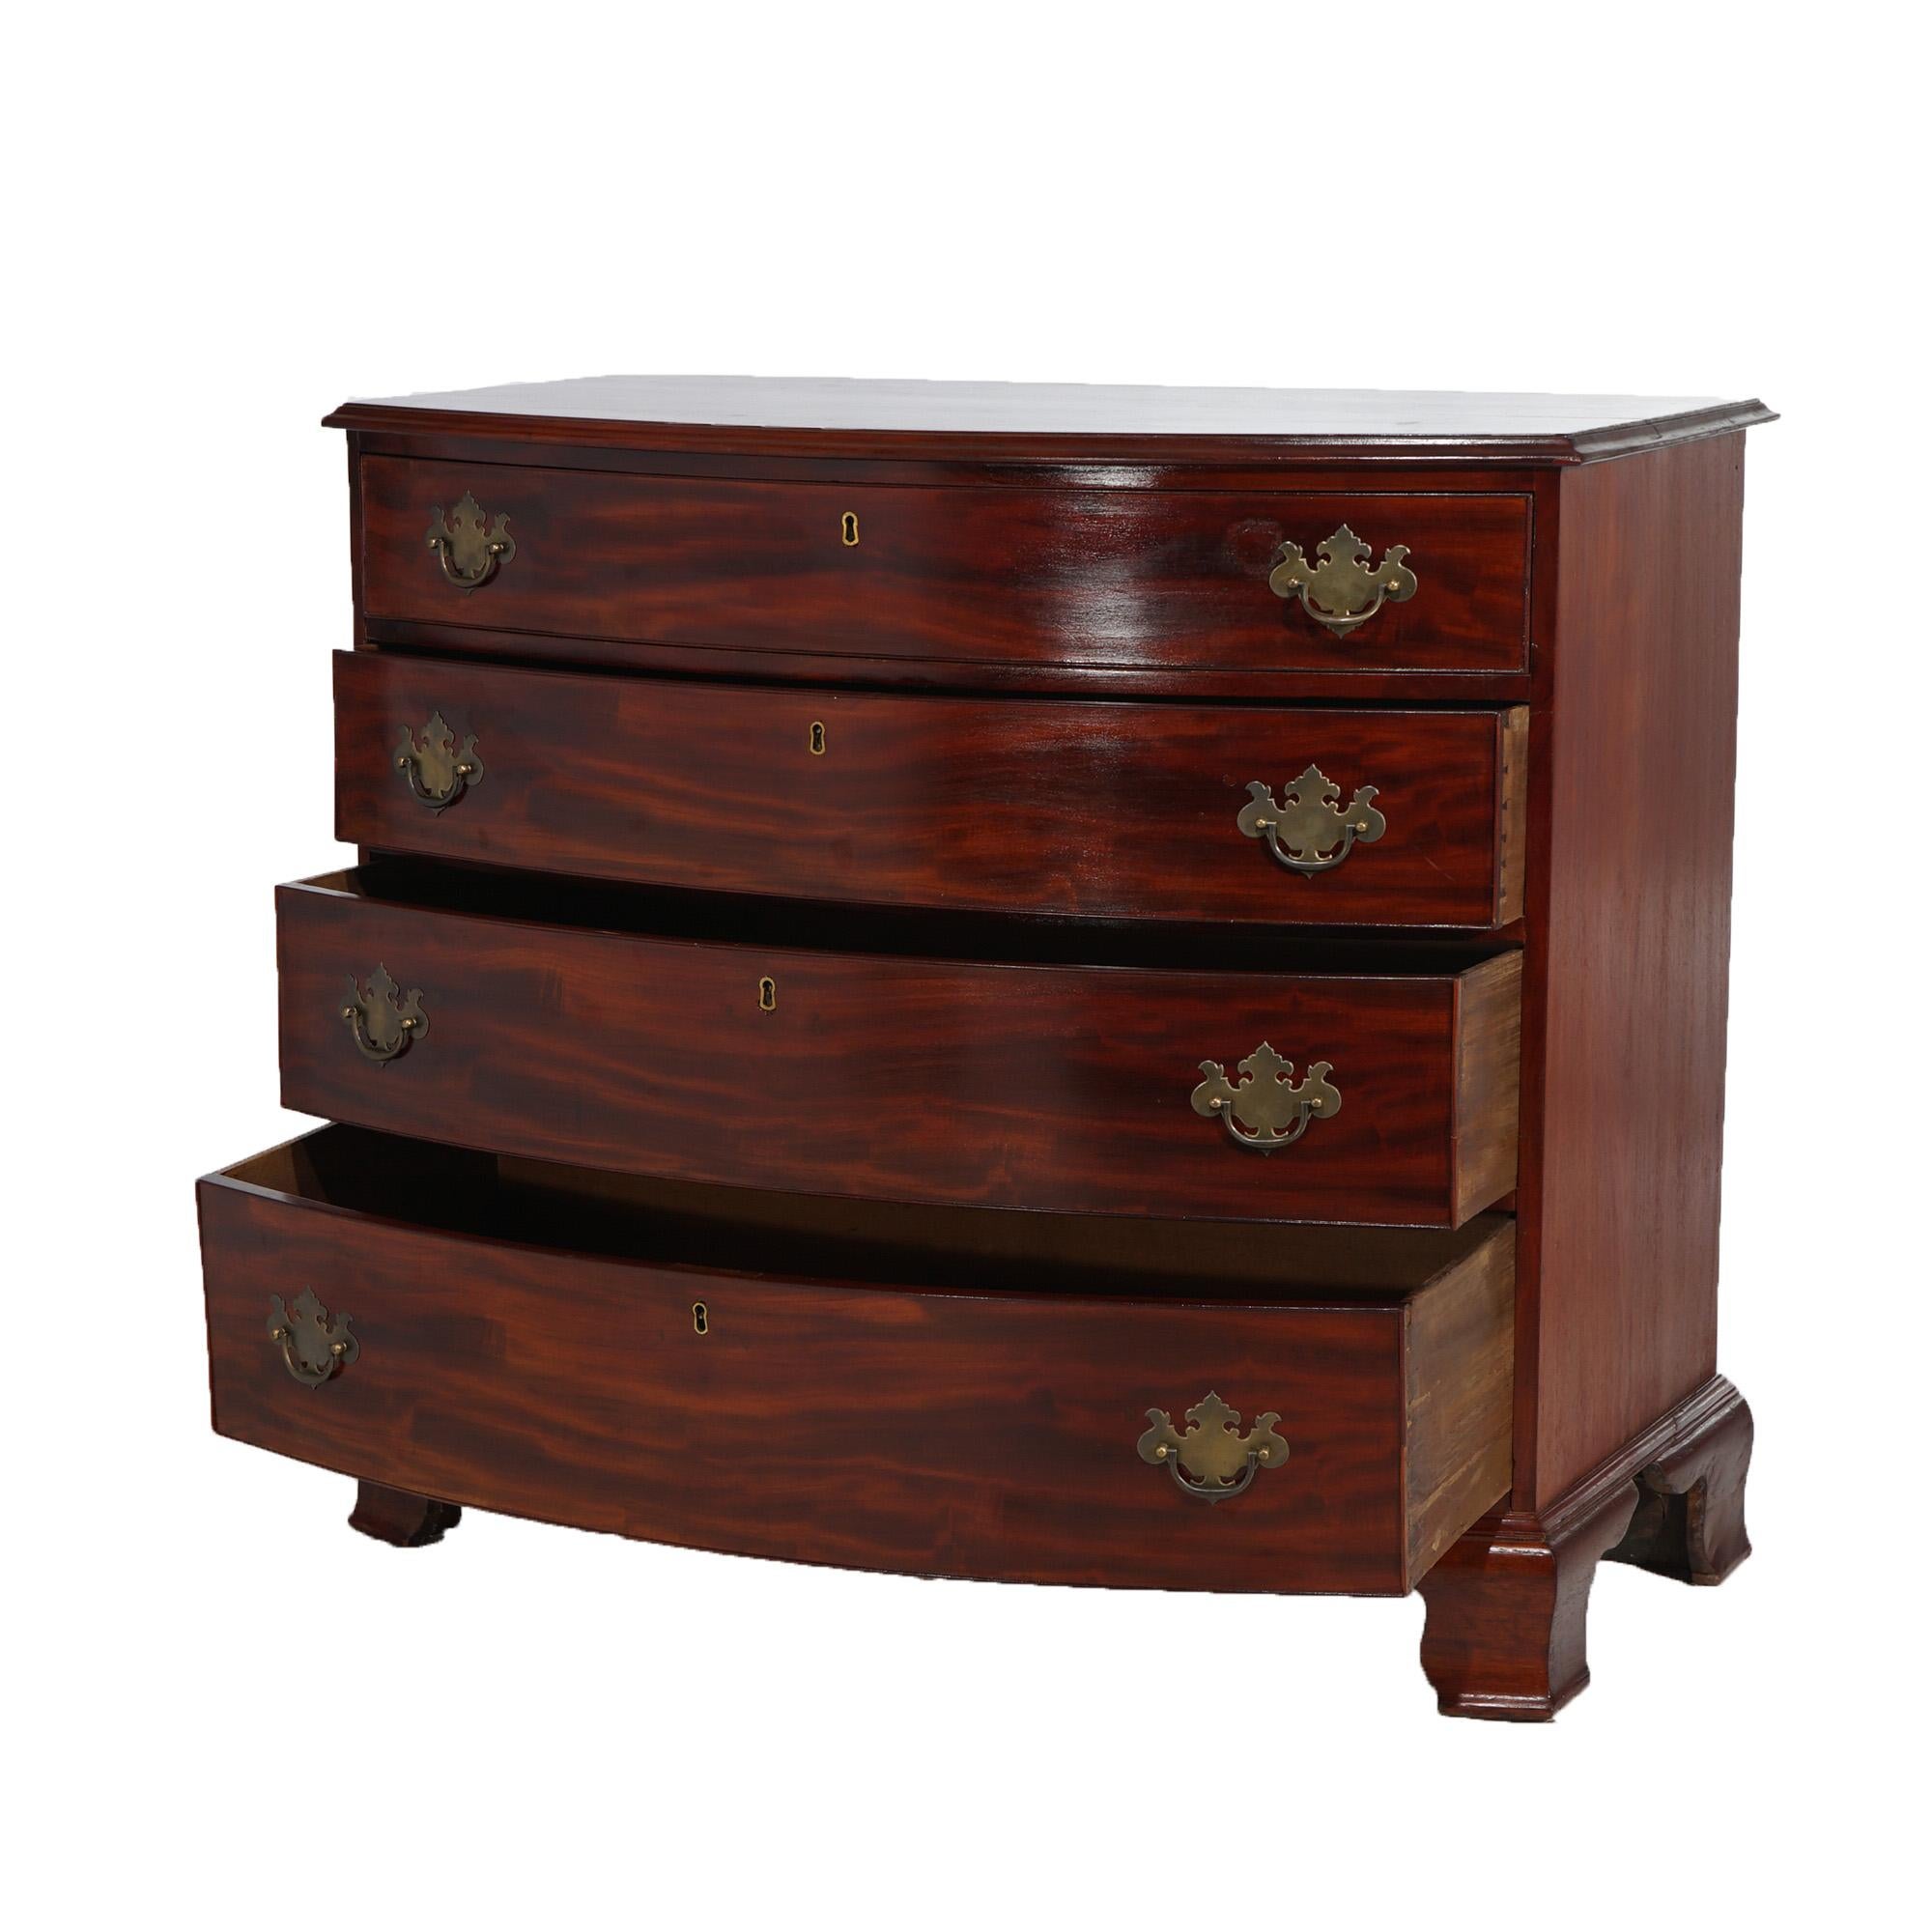 An antique Chippendale chest offers flame mahogany construction in bow front form and having four graduated long drawers, raised on bracket feet, c1830

Measures- 37.25''H x 41.75''W x 23.25''D